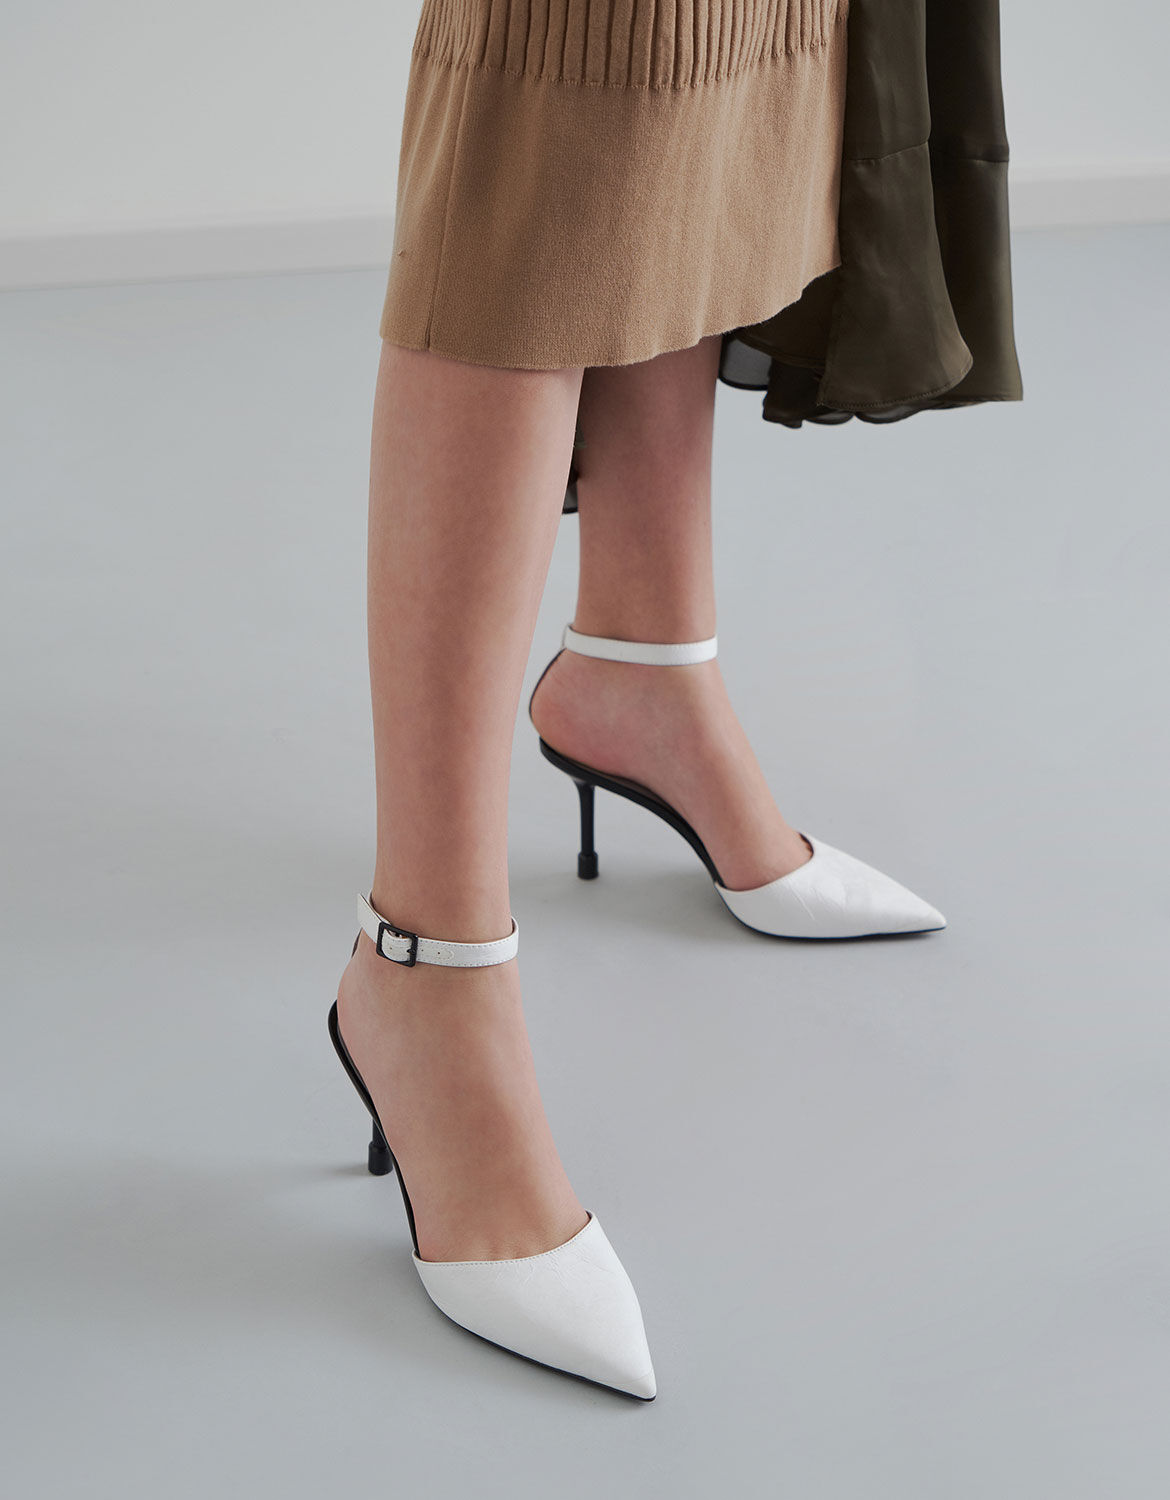 closed toe pumps with ankle strap